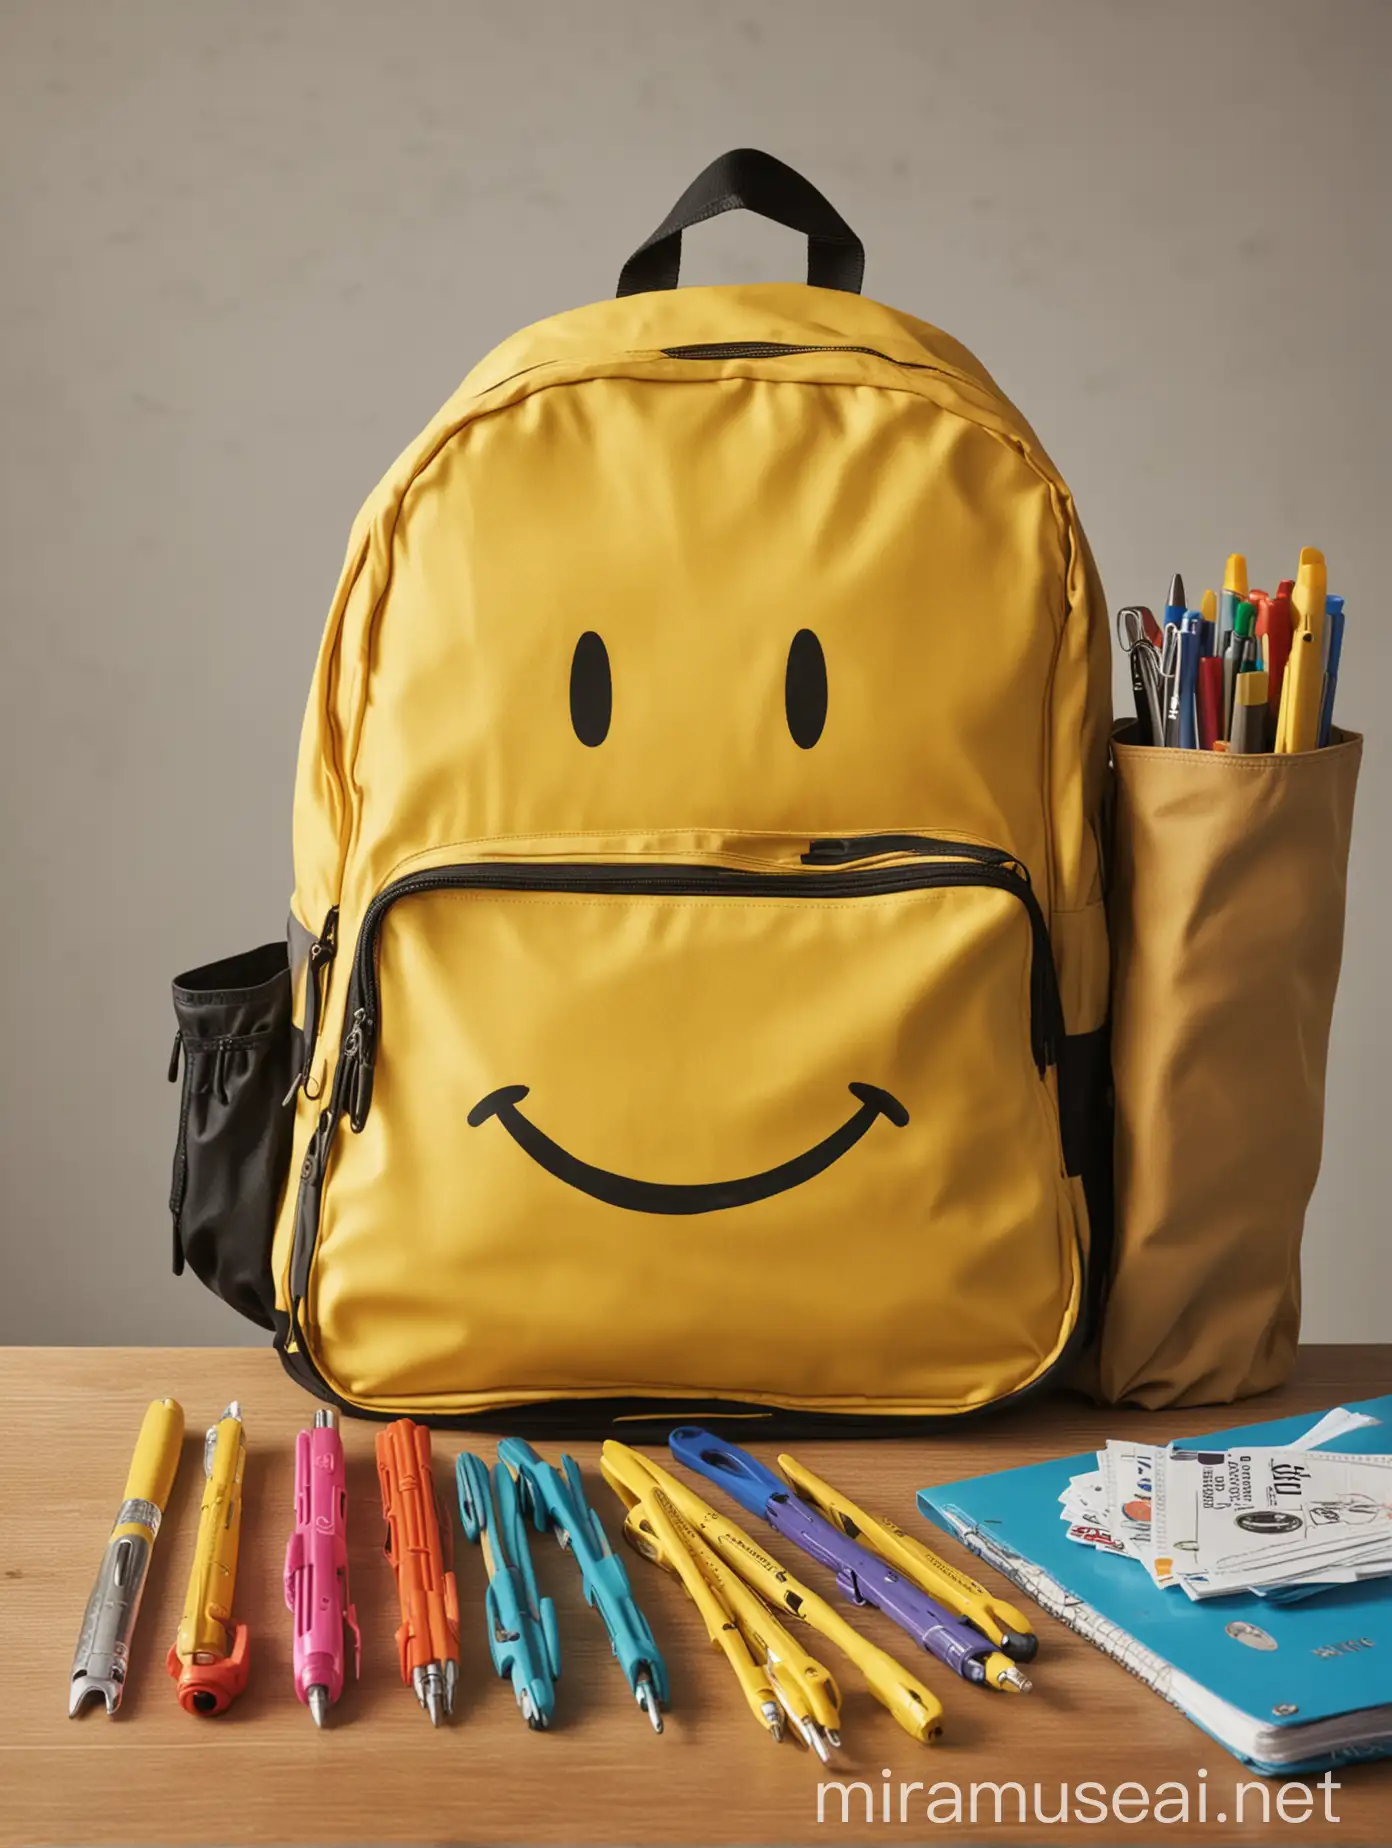 Smiling School Bag with Classroom Tools